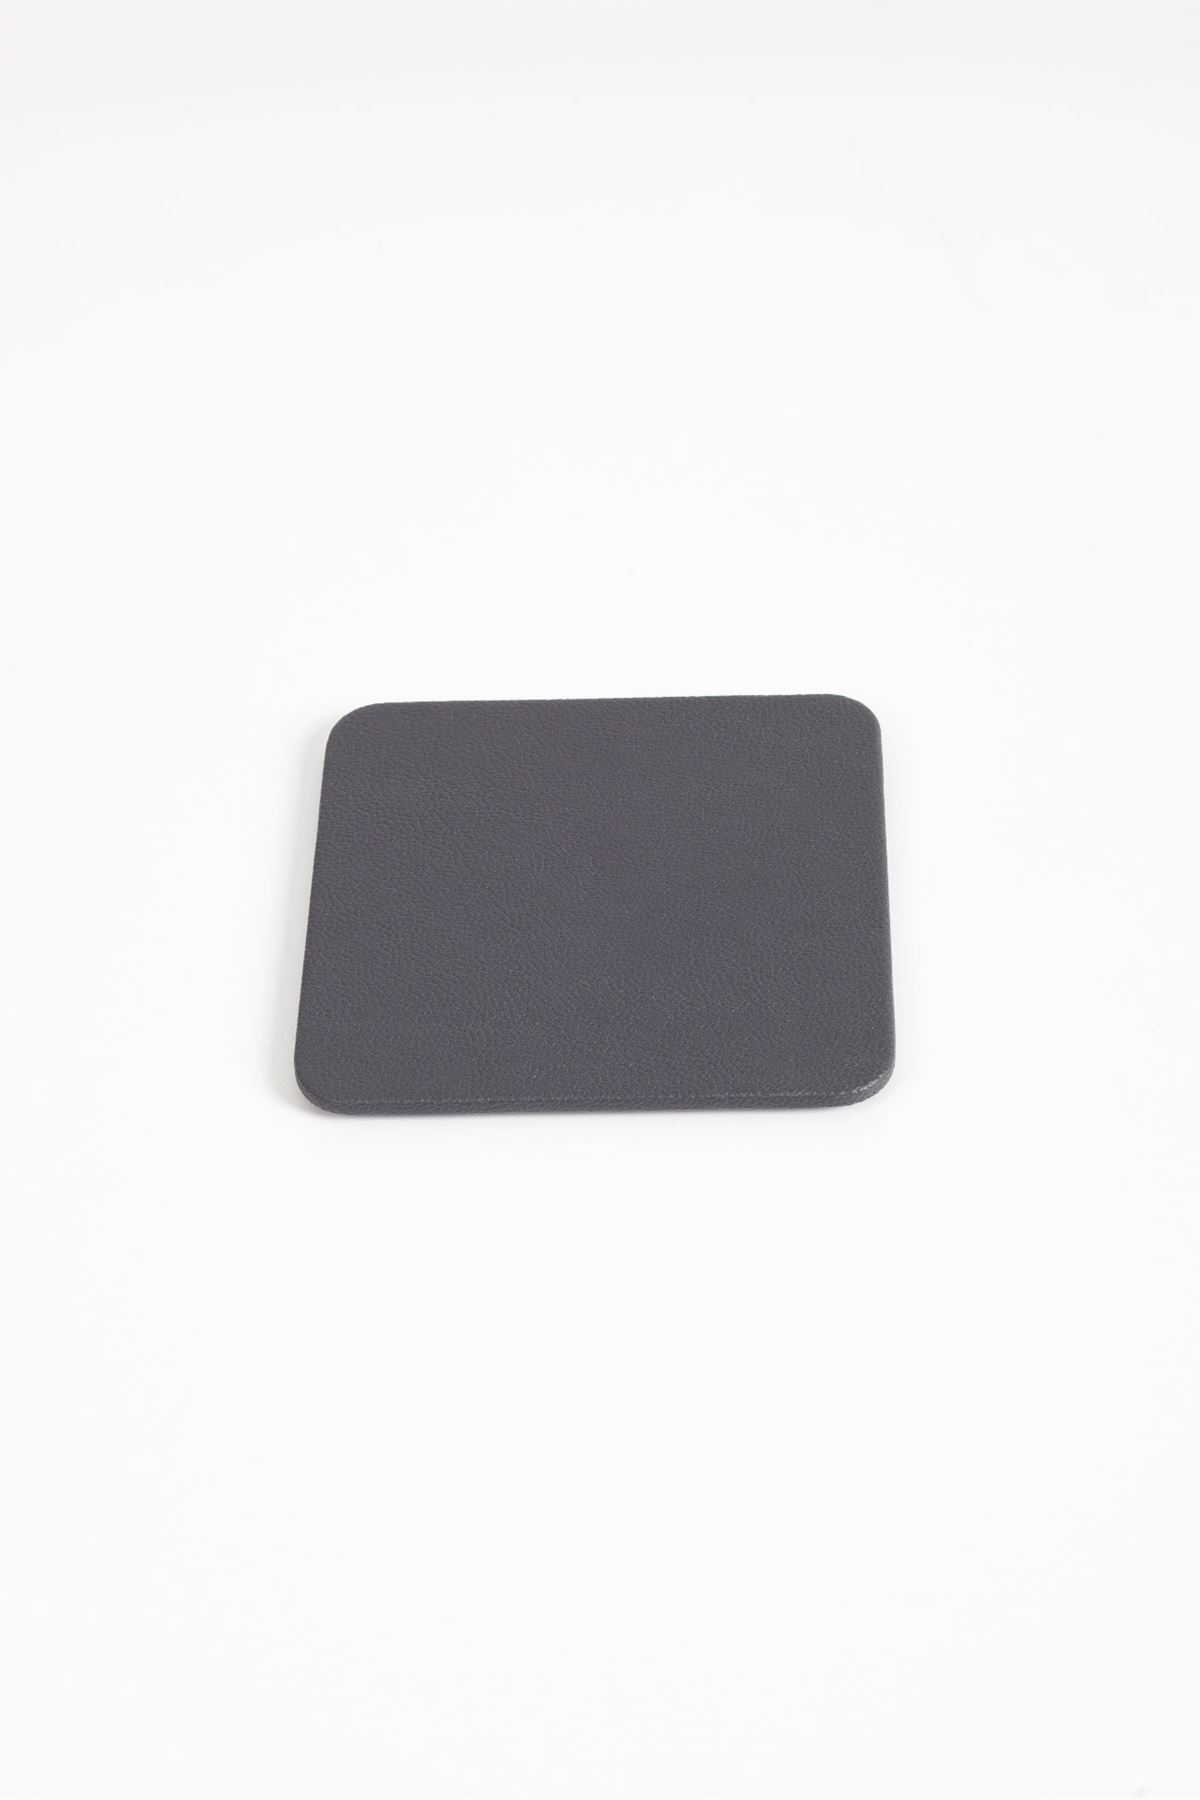 Anthracite Leather Square Coaster 1 Piece